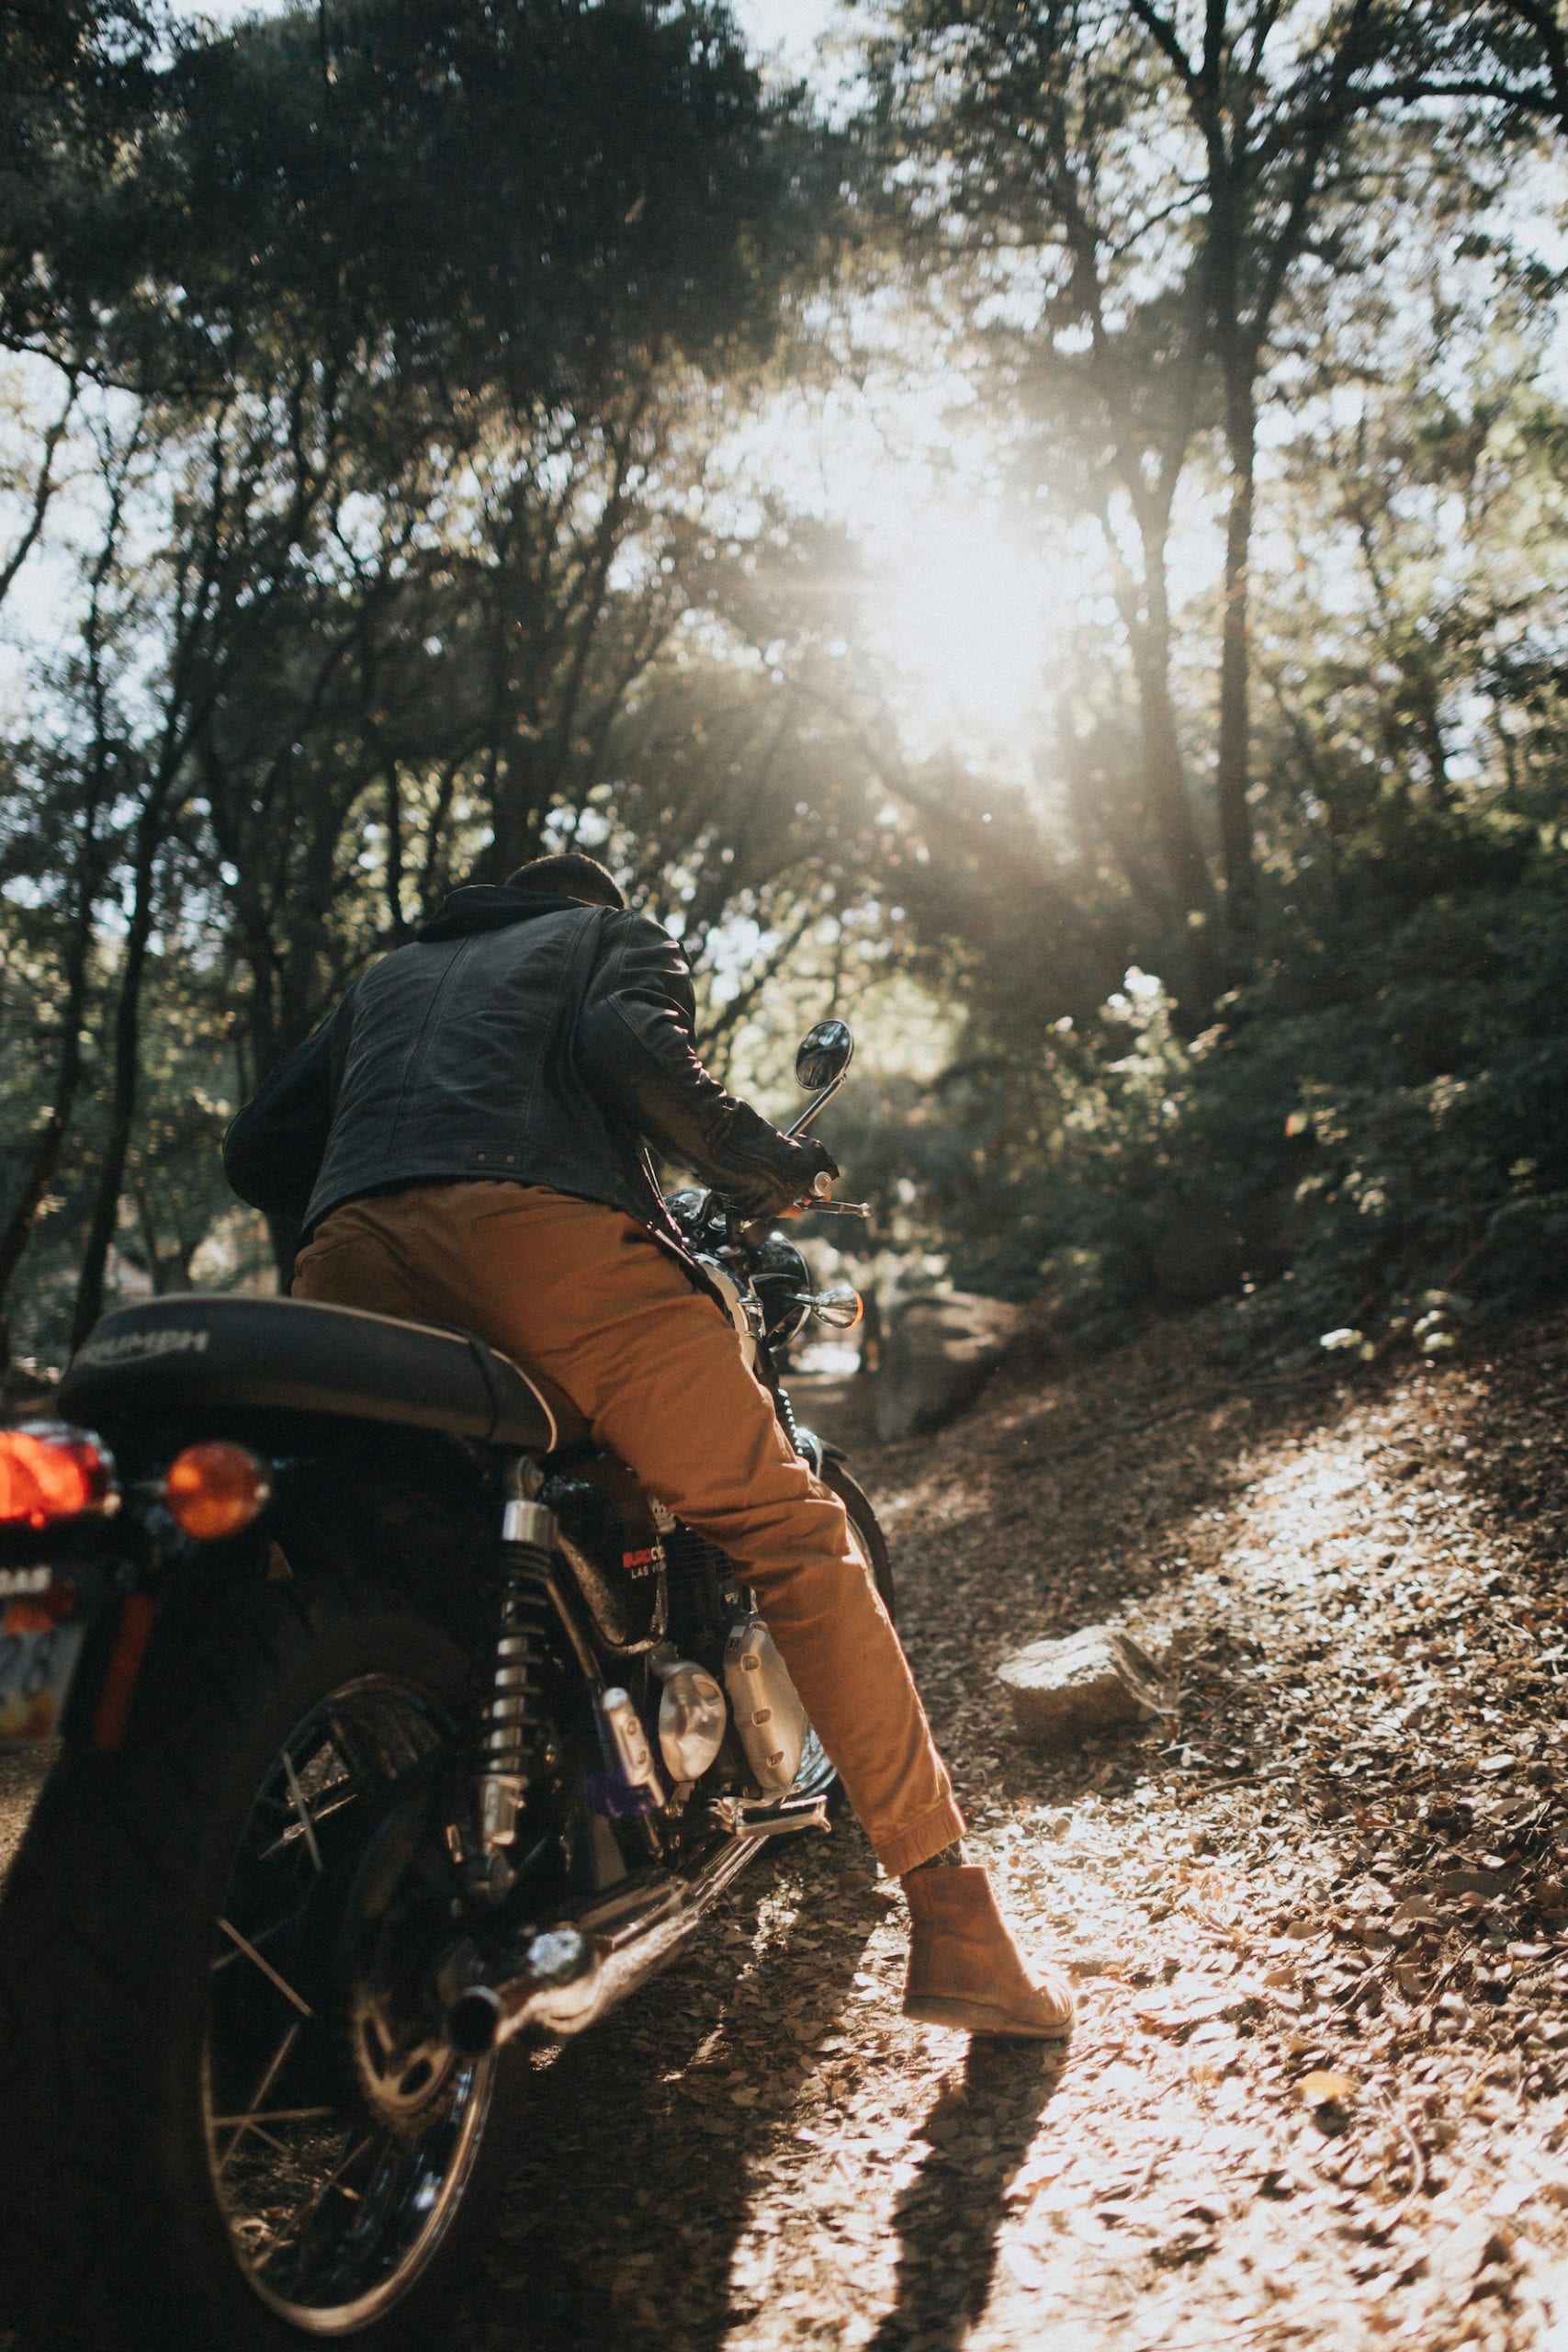 View from behind of motorcycle rider sitting on the motorcycle going up a forest path